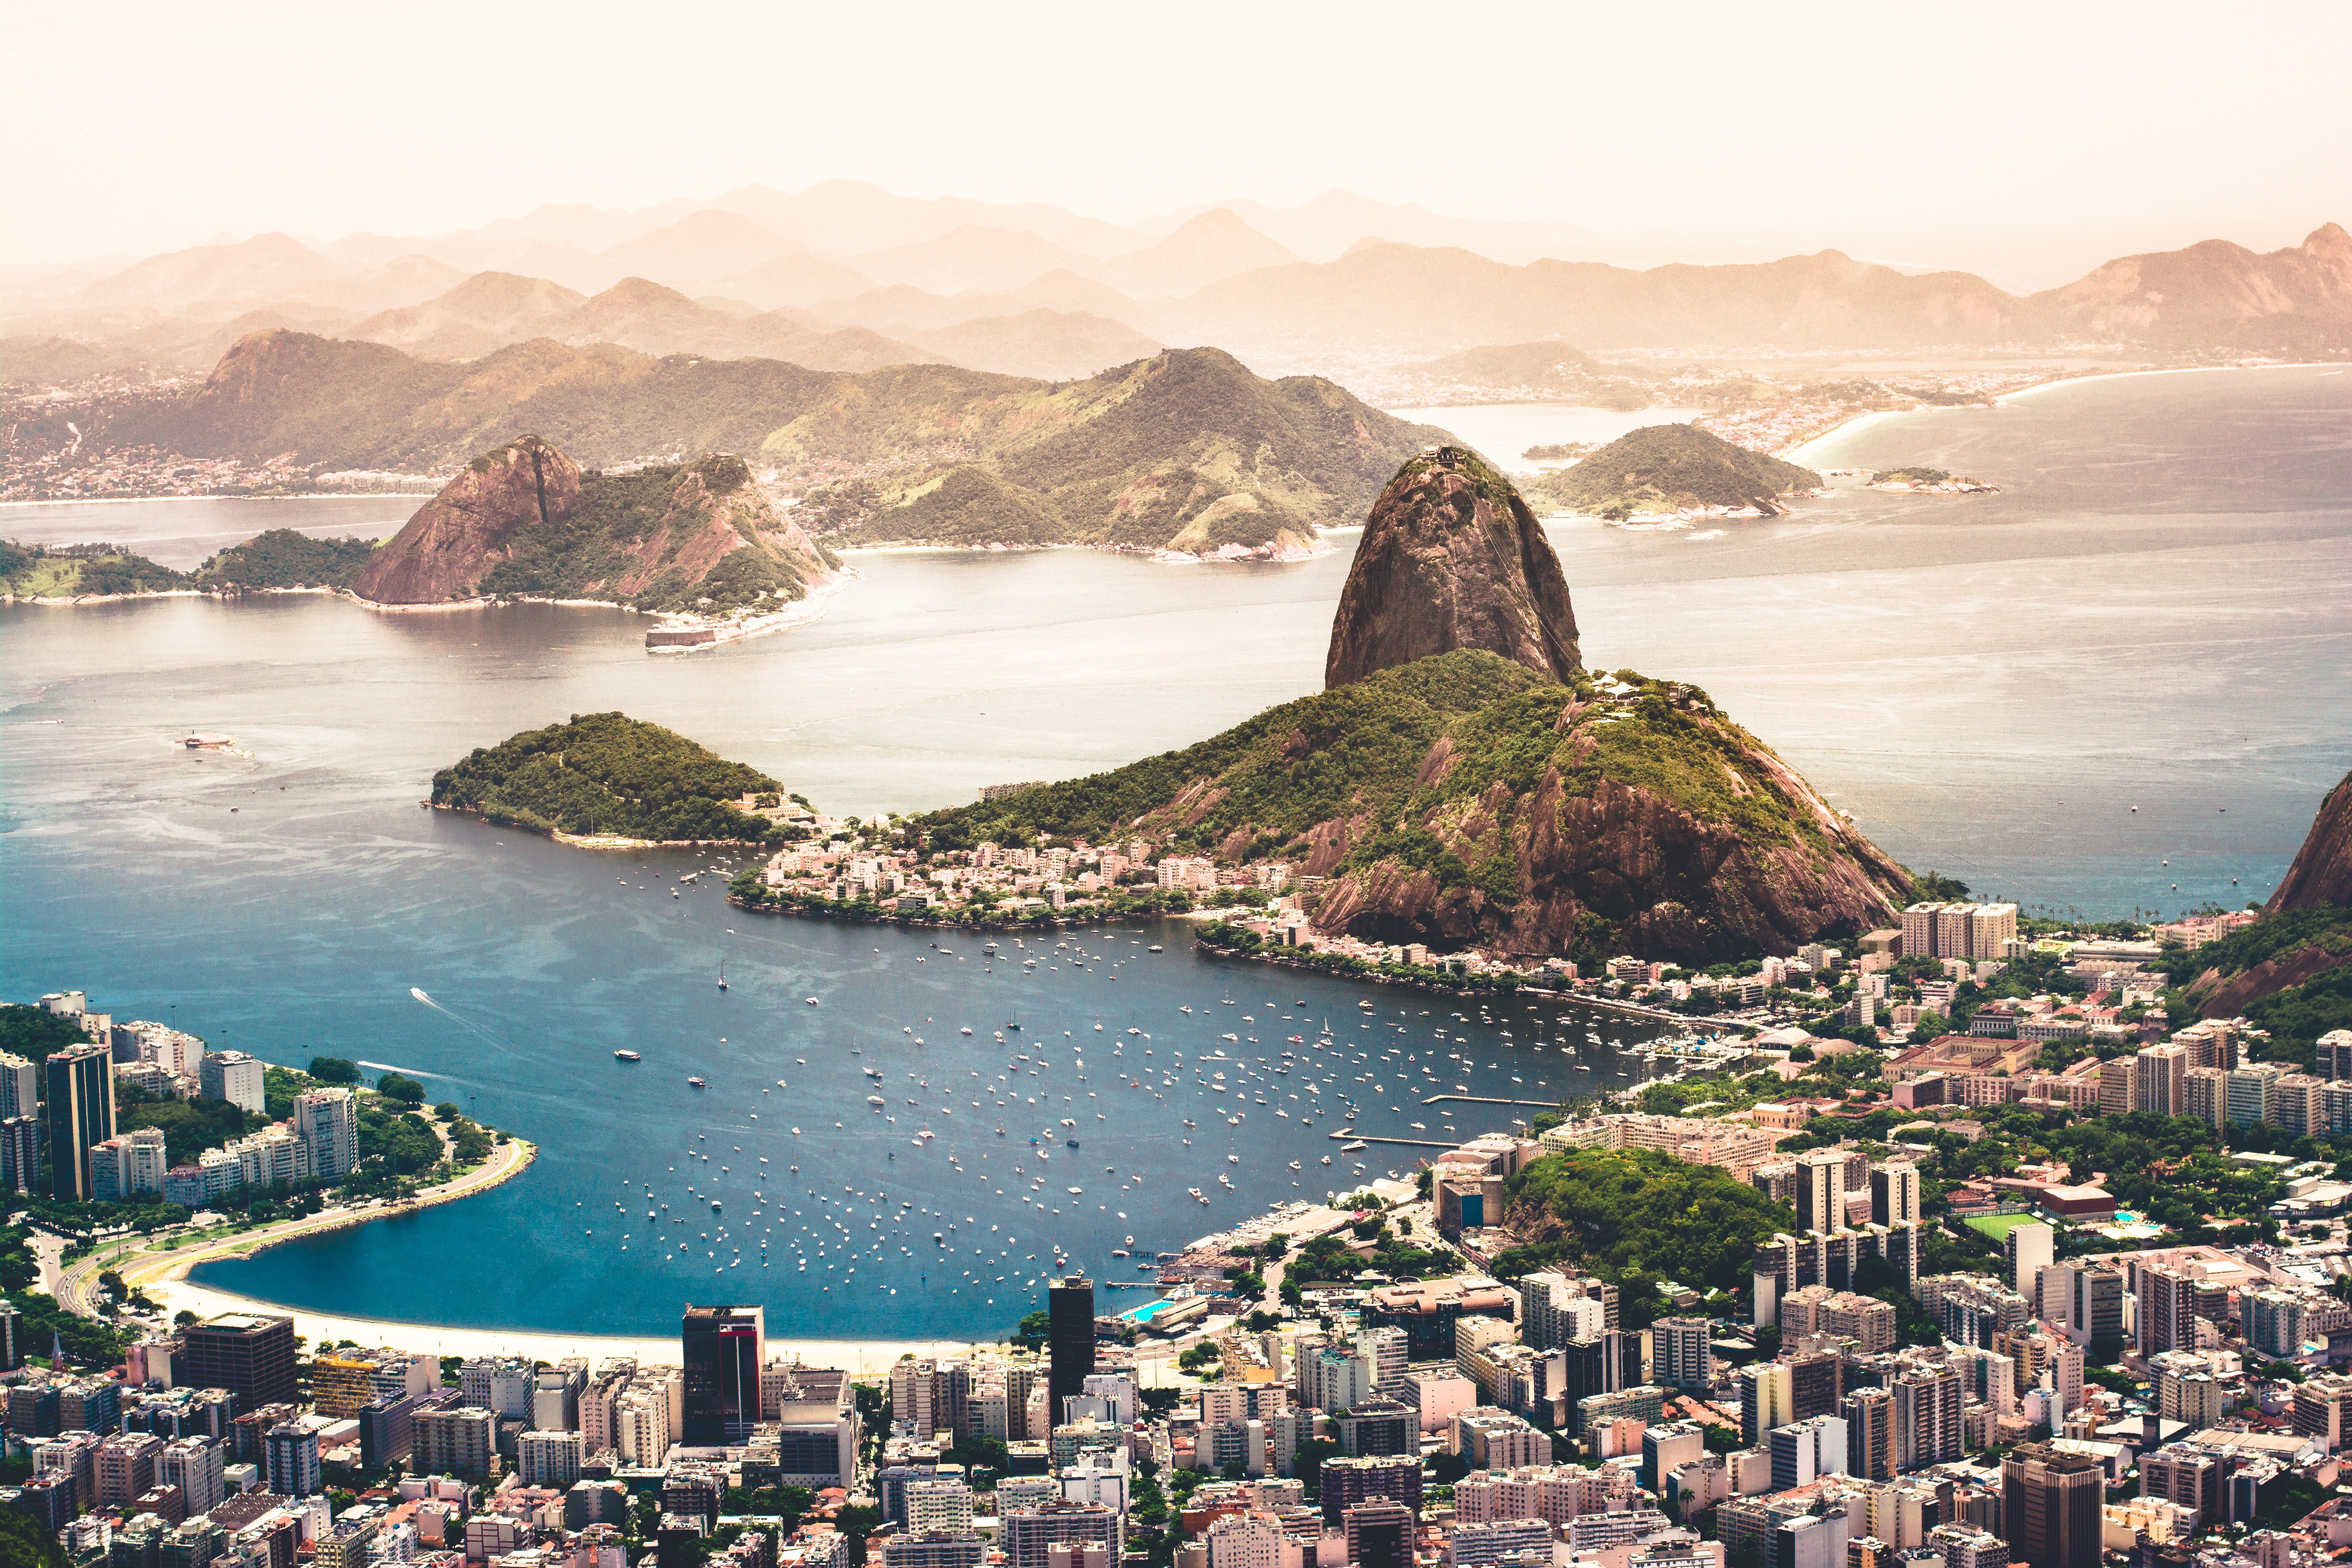 Brazil is experiencing a crypto boom as trust in government reduces 